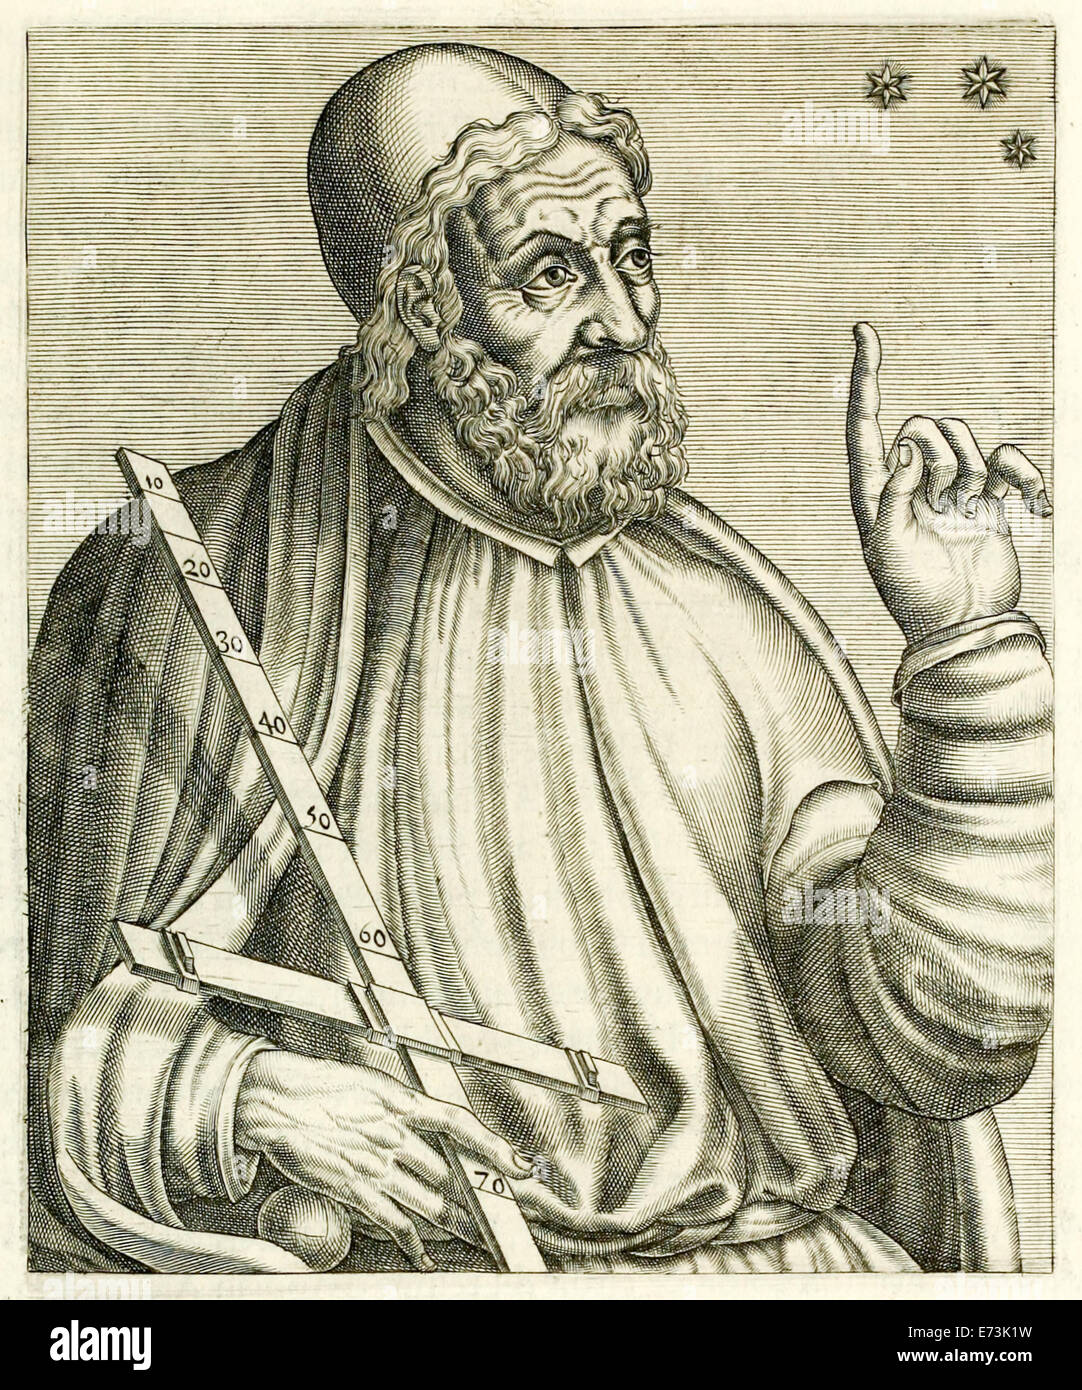 Ptolemy, Greek astronomer - Stock Image - H416/0405 - Science